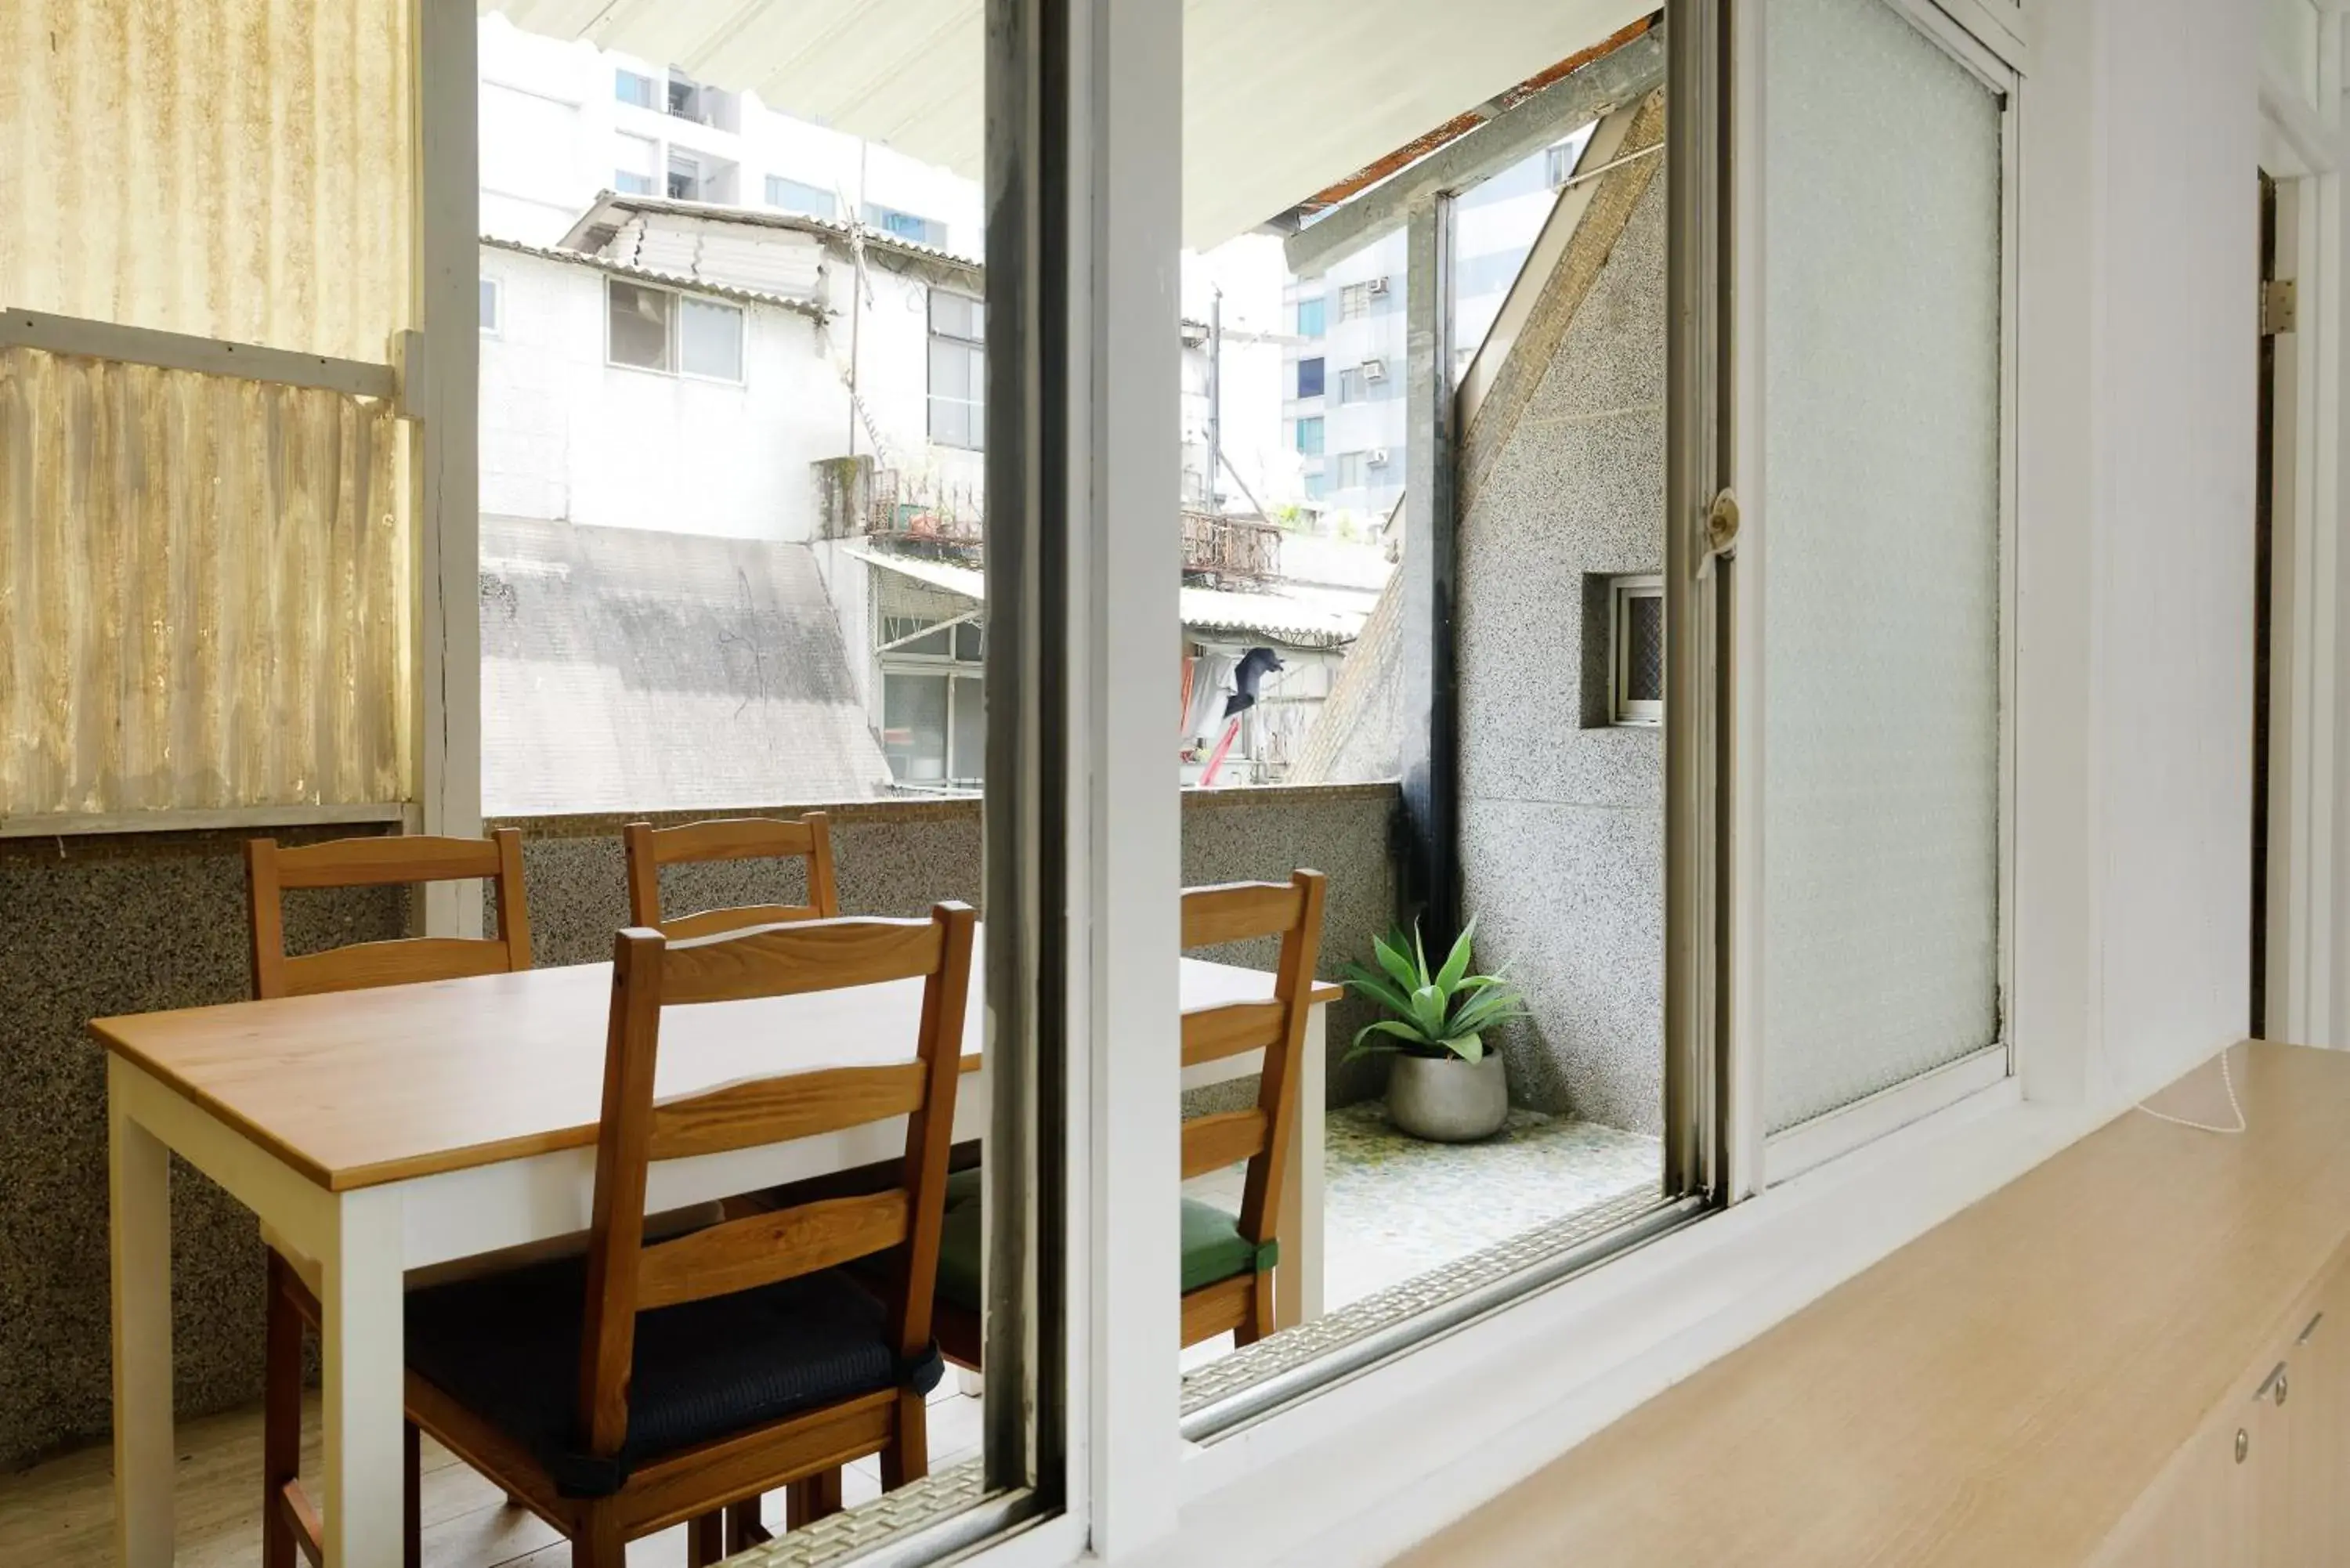 Superior Double Room with Private Bathroom & Balcony - single occupancy in Flip Flop Hostel - Garden